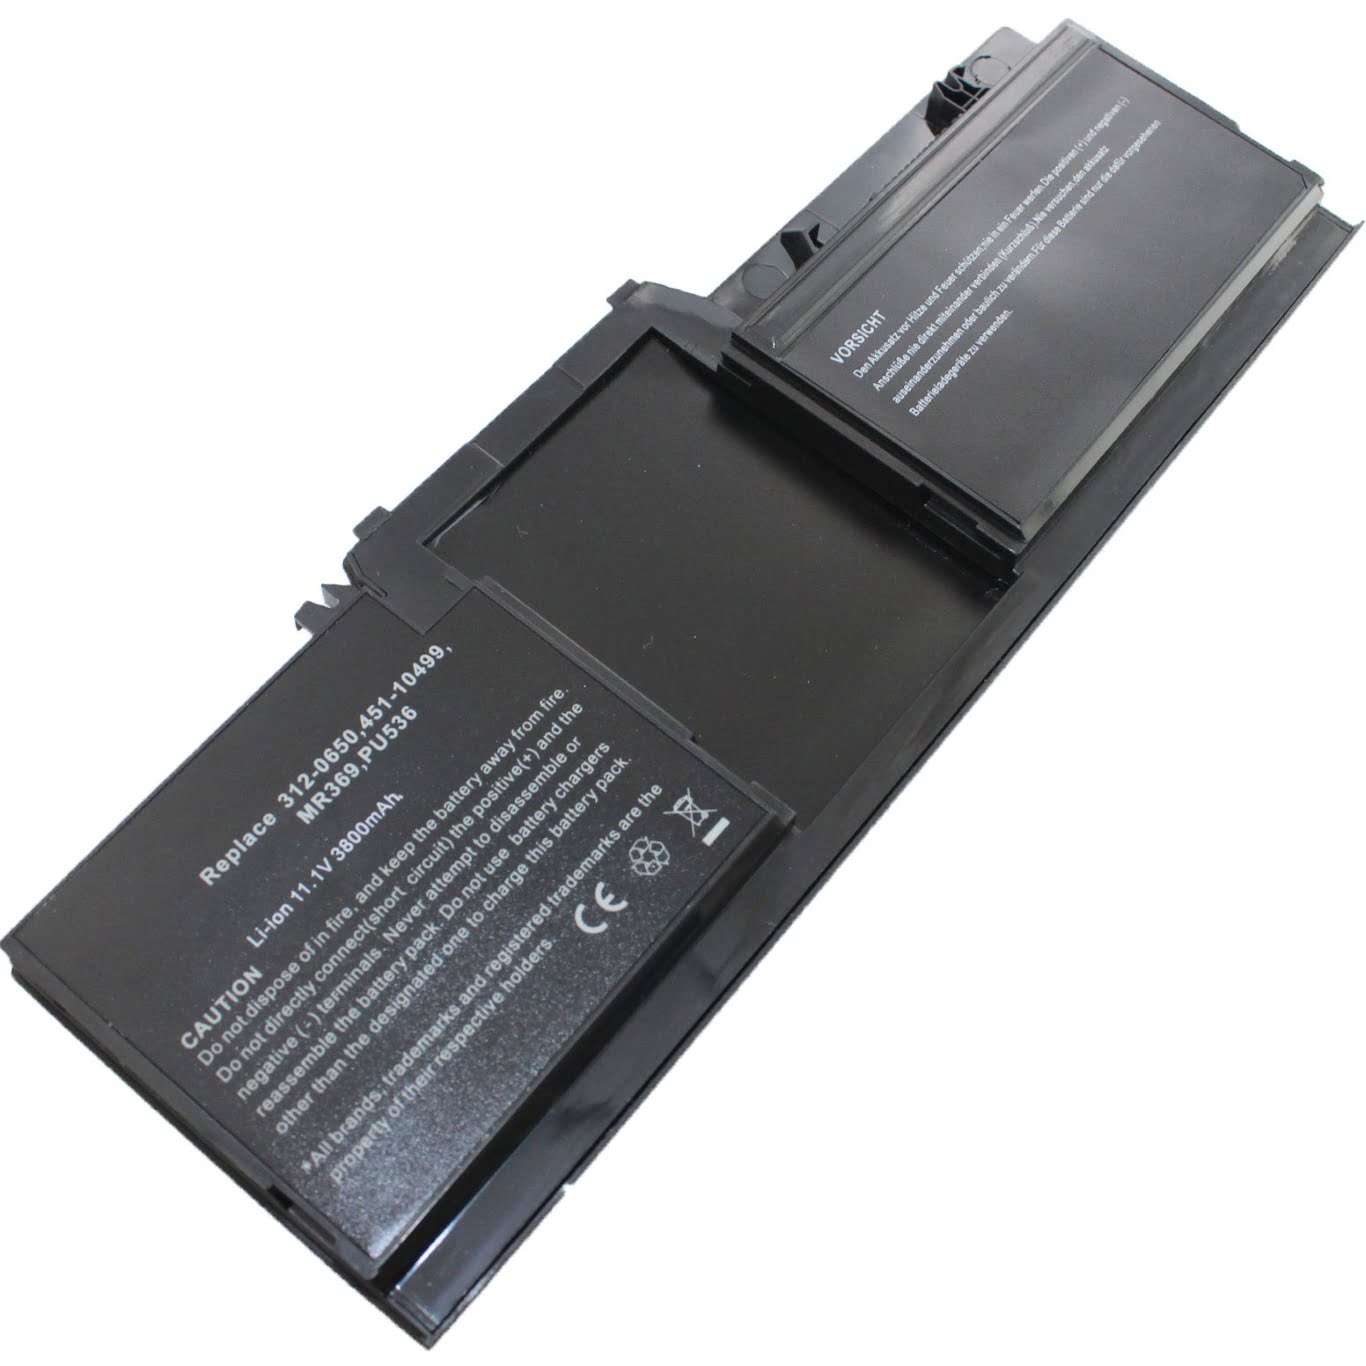 0FW273, 0J927H replacement Laptop Battery for Dell Latitude XT Tablet PC, Latitude XT2 Tablet PC